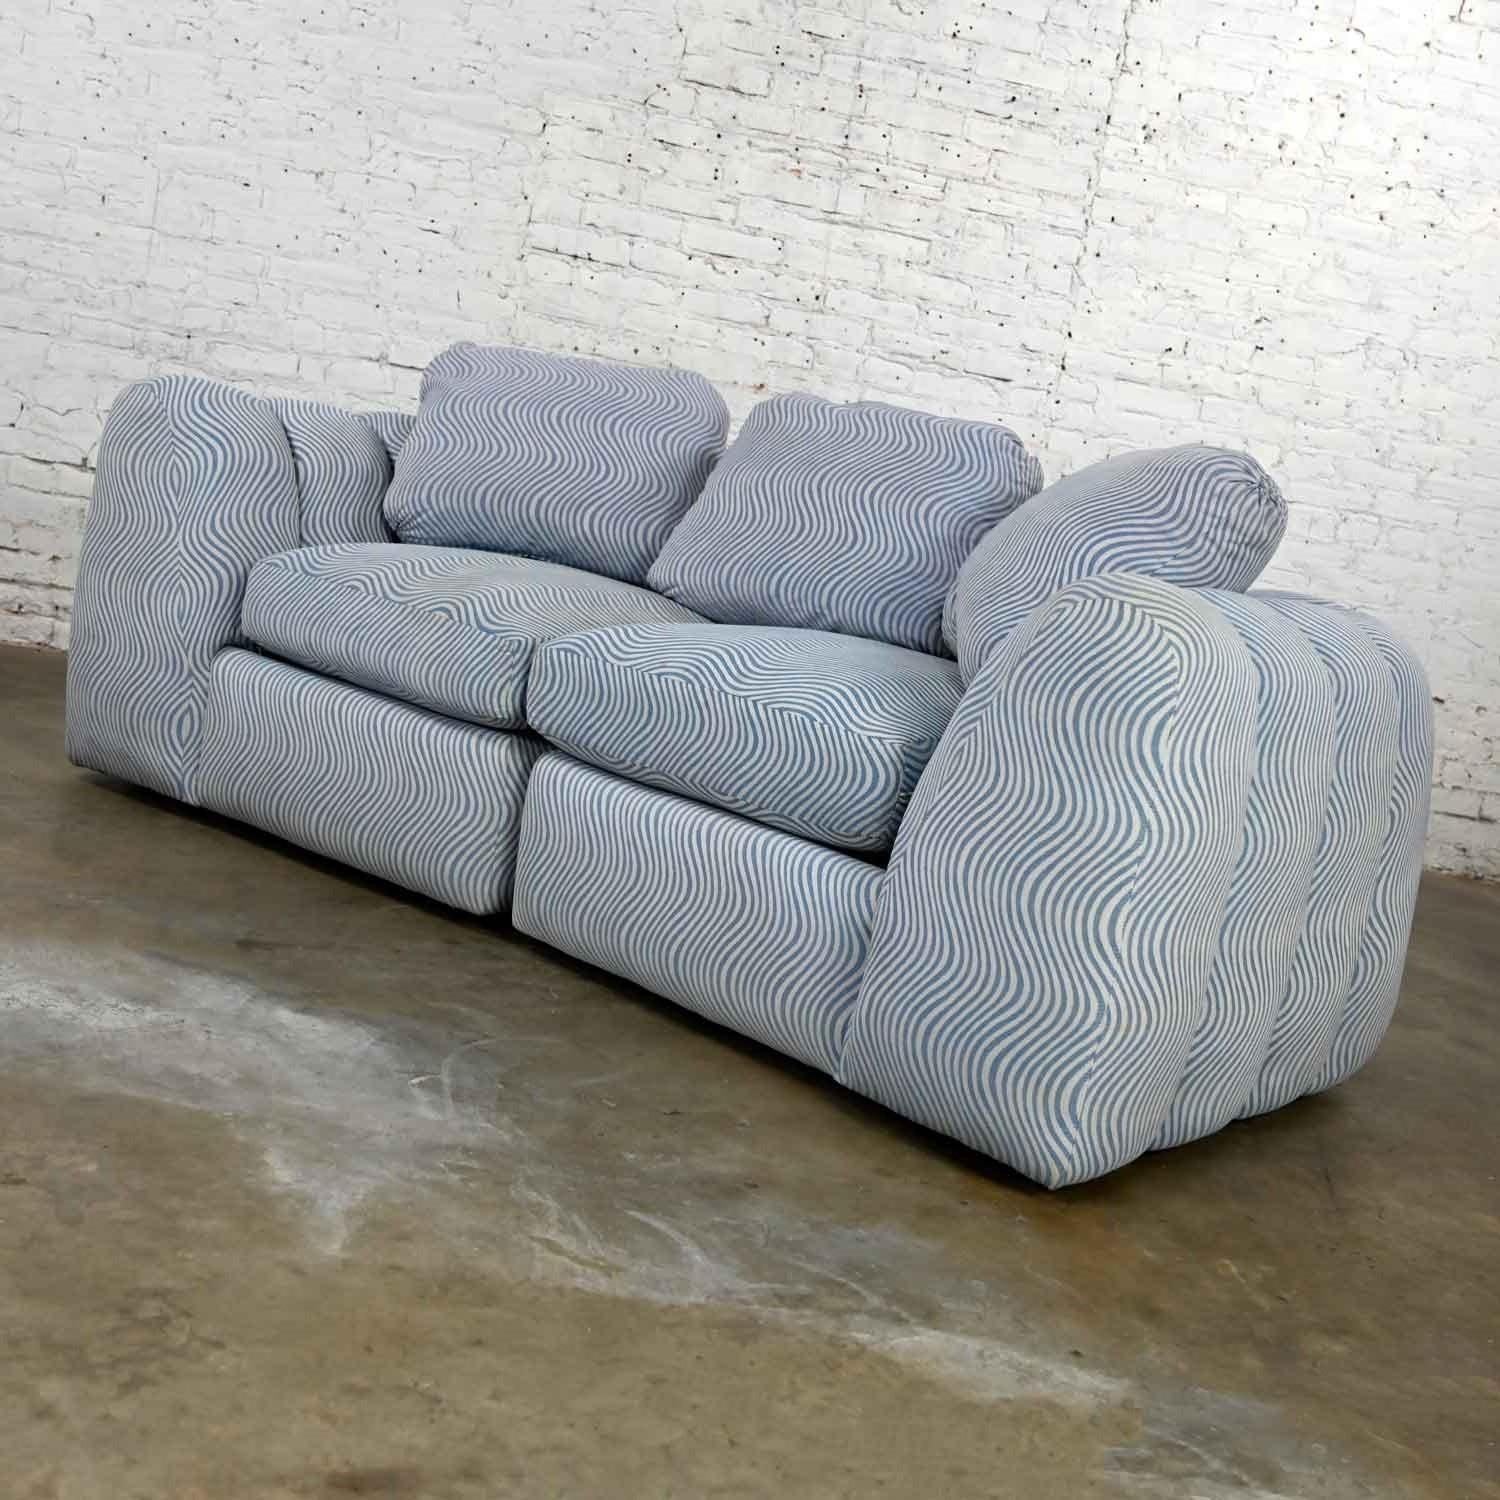 20th Century Modern Postmodern Channeled Sectional Loveseat Lounge Chairs Style Jay Spectre For Sale